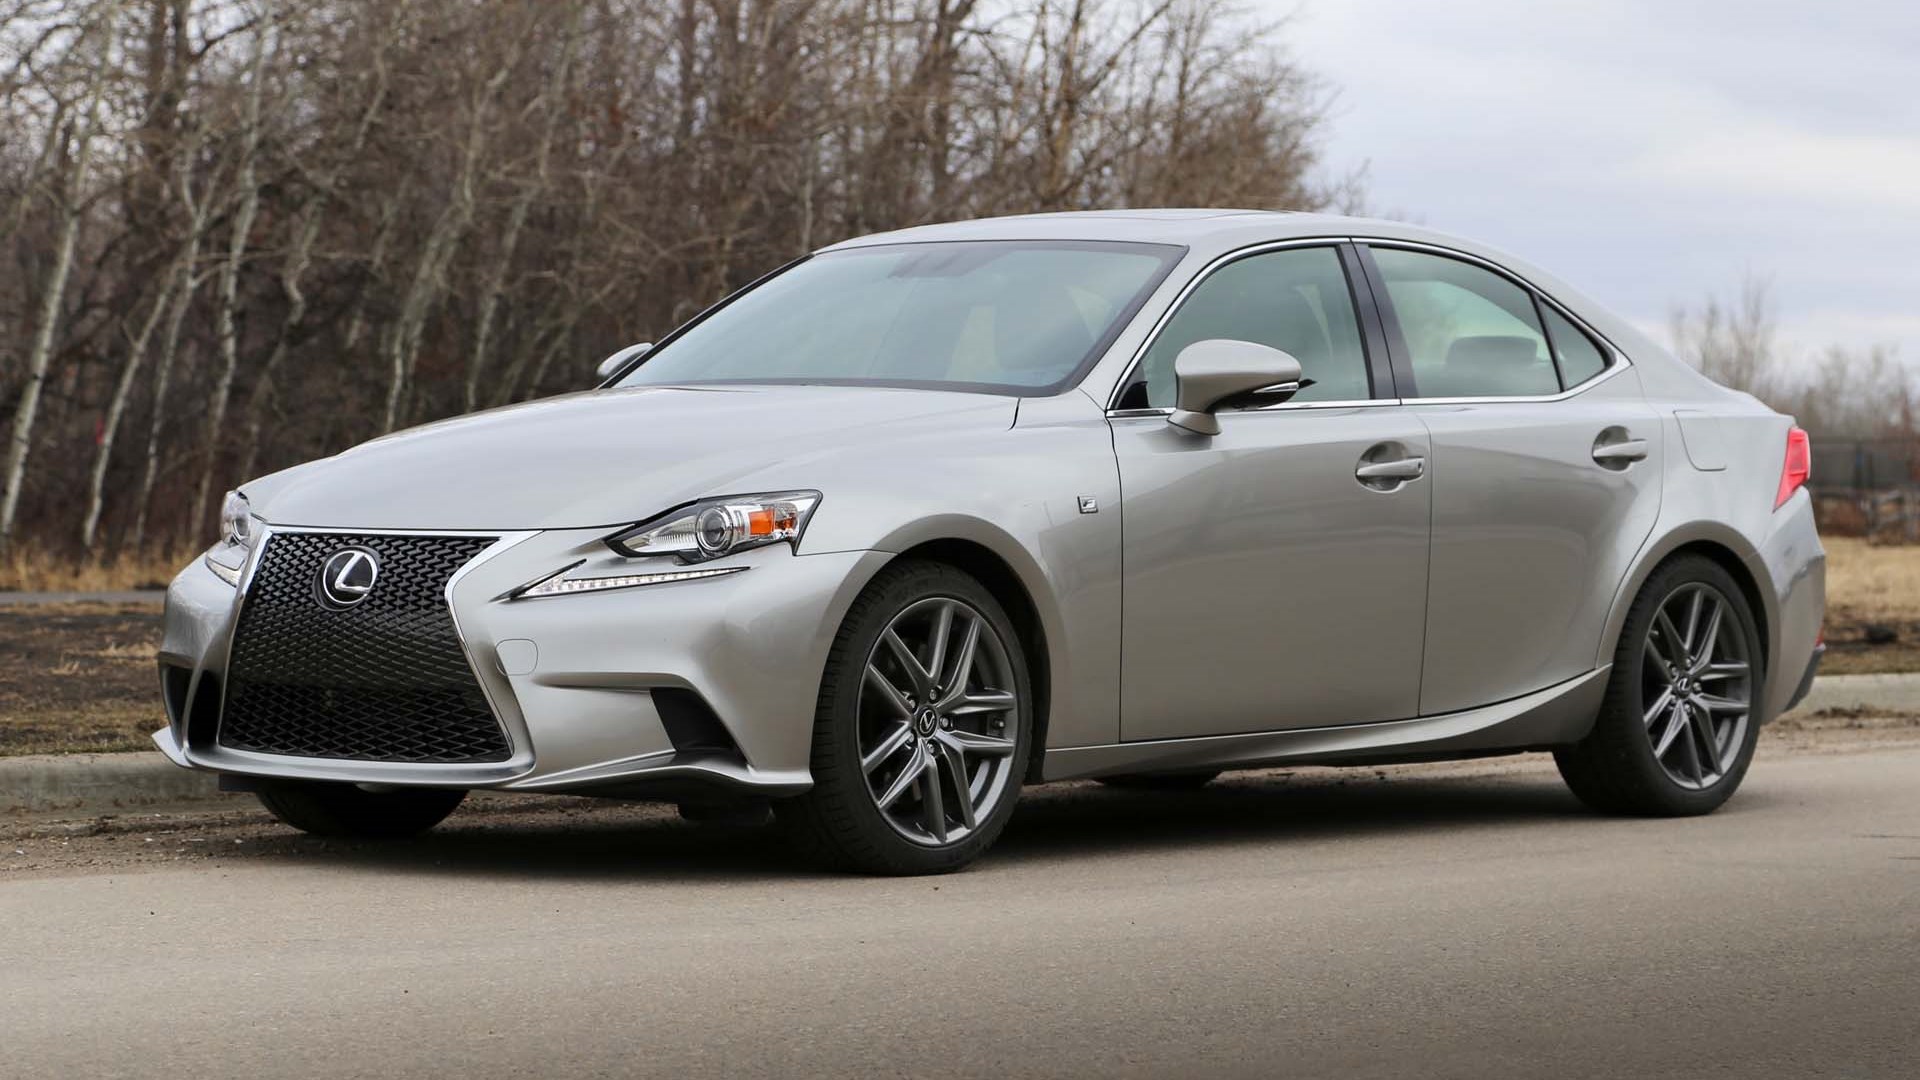 2016 Lexus IS 300 AWD Test Drive Review | AutoTrader.ca